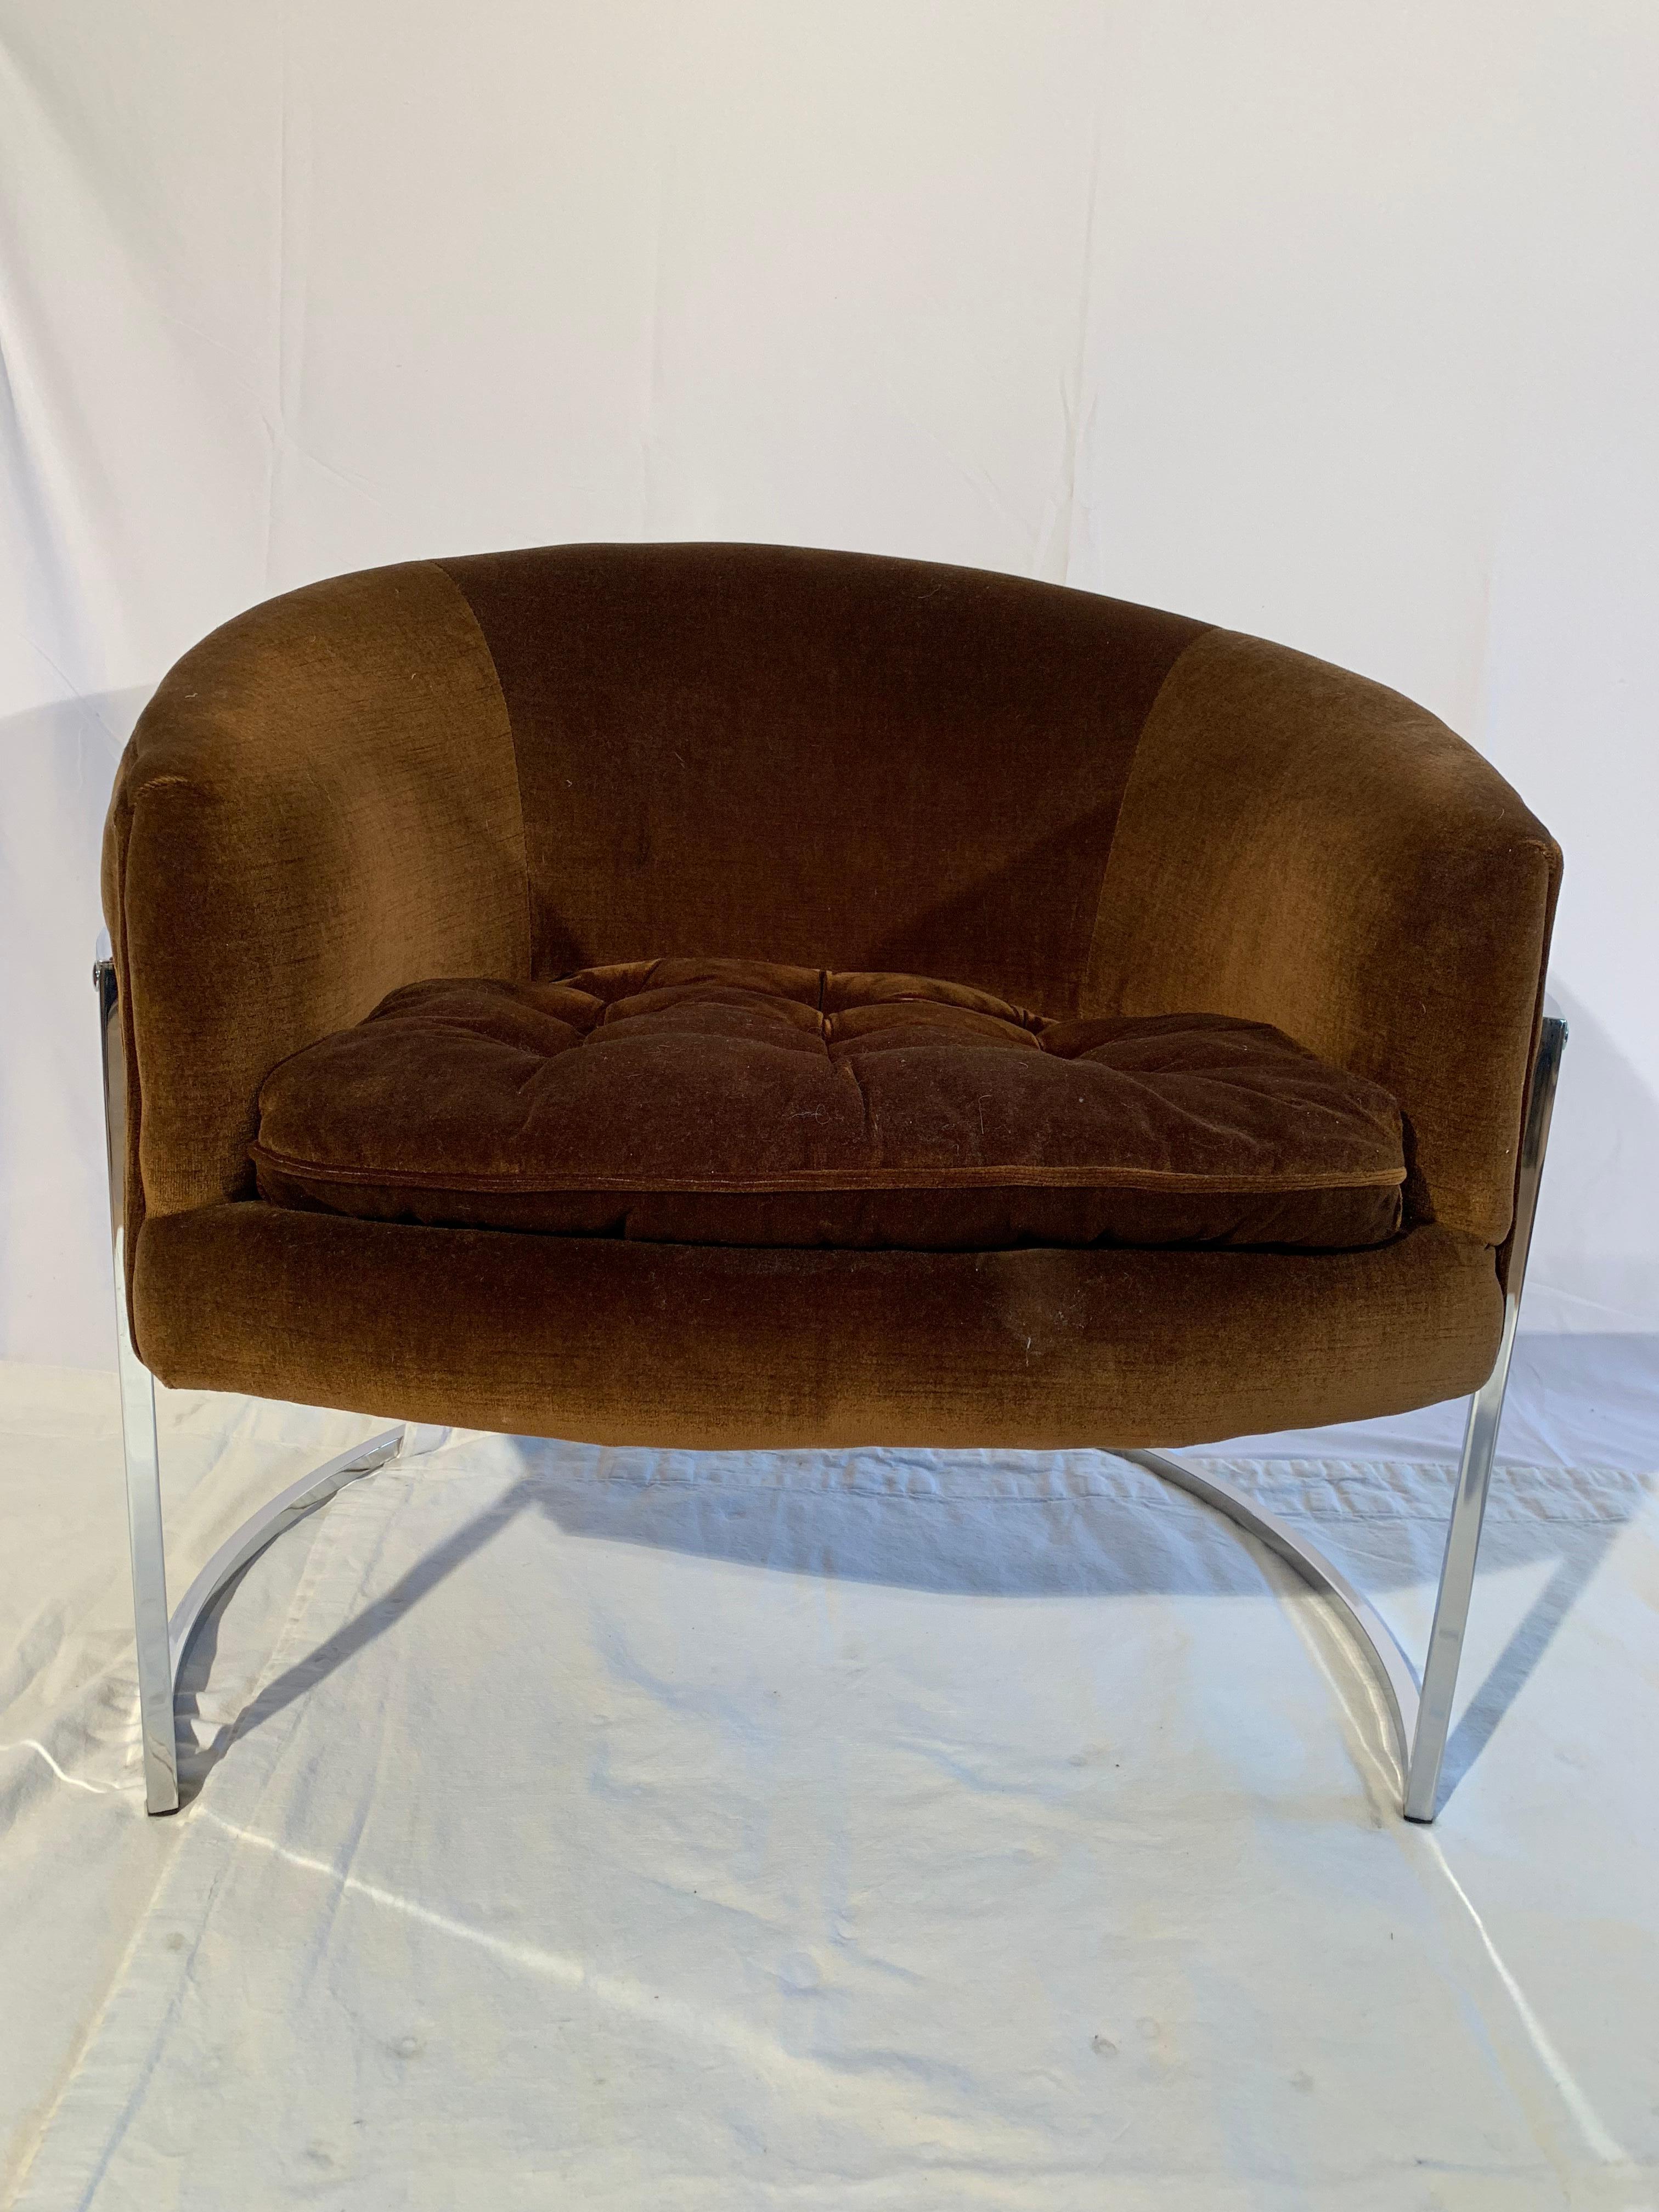 These chairs are a very comfy and a generous size. The chair seems to float above the thin chrome frame. The fabric is original and in very good condition, however an updated upholstery is recommended. The chrome frames are in excellent condition.